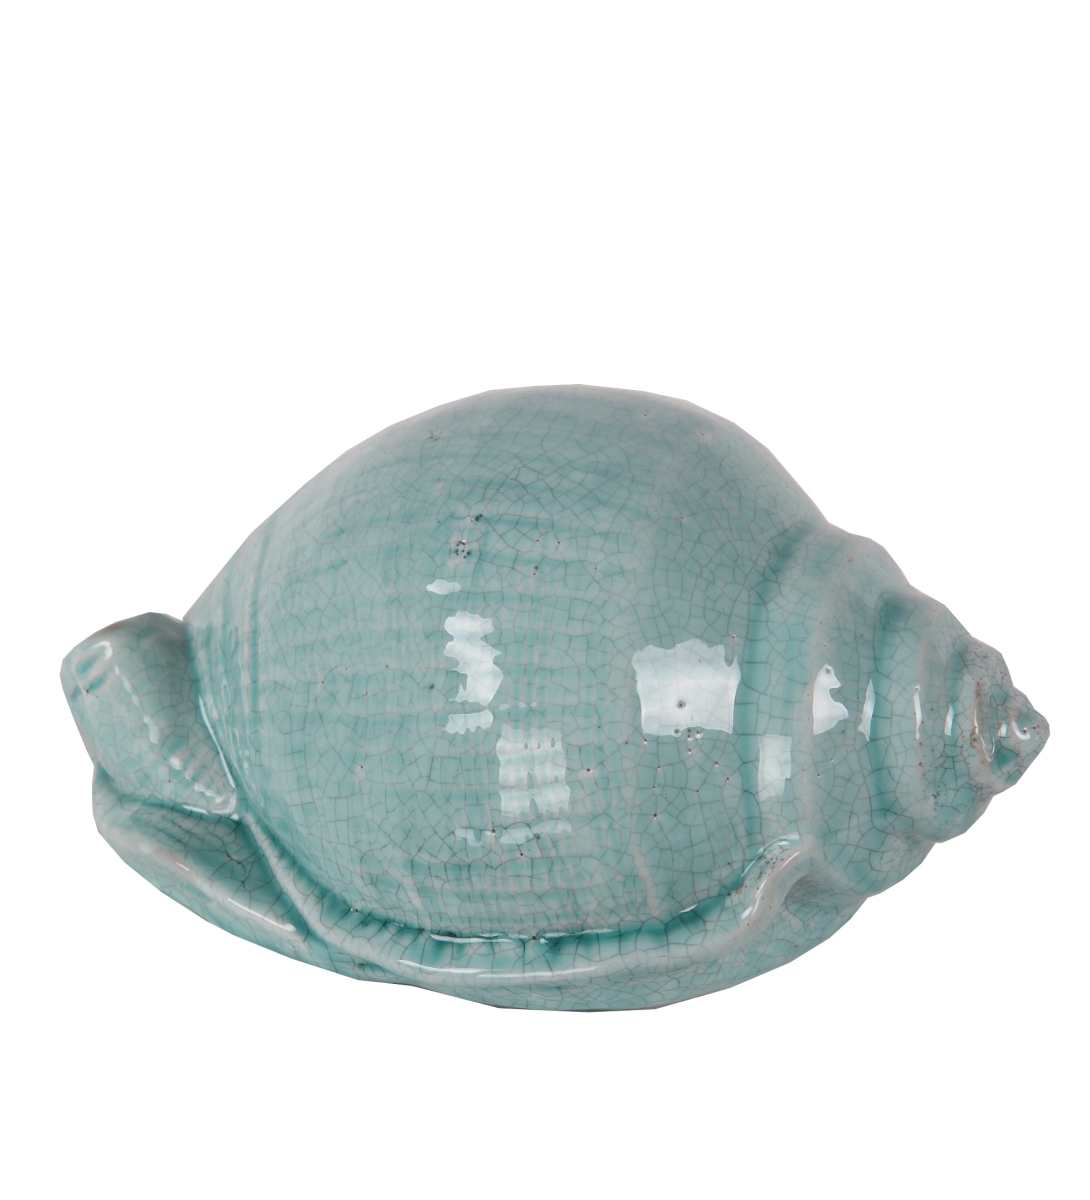 20368 10 X 6.5 X 5 In. Traditional Ceramic Shell, Blue